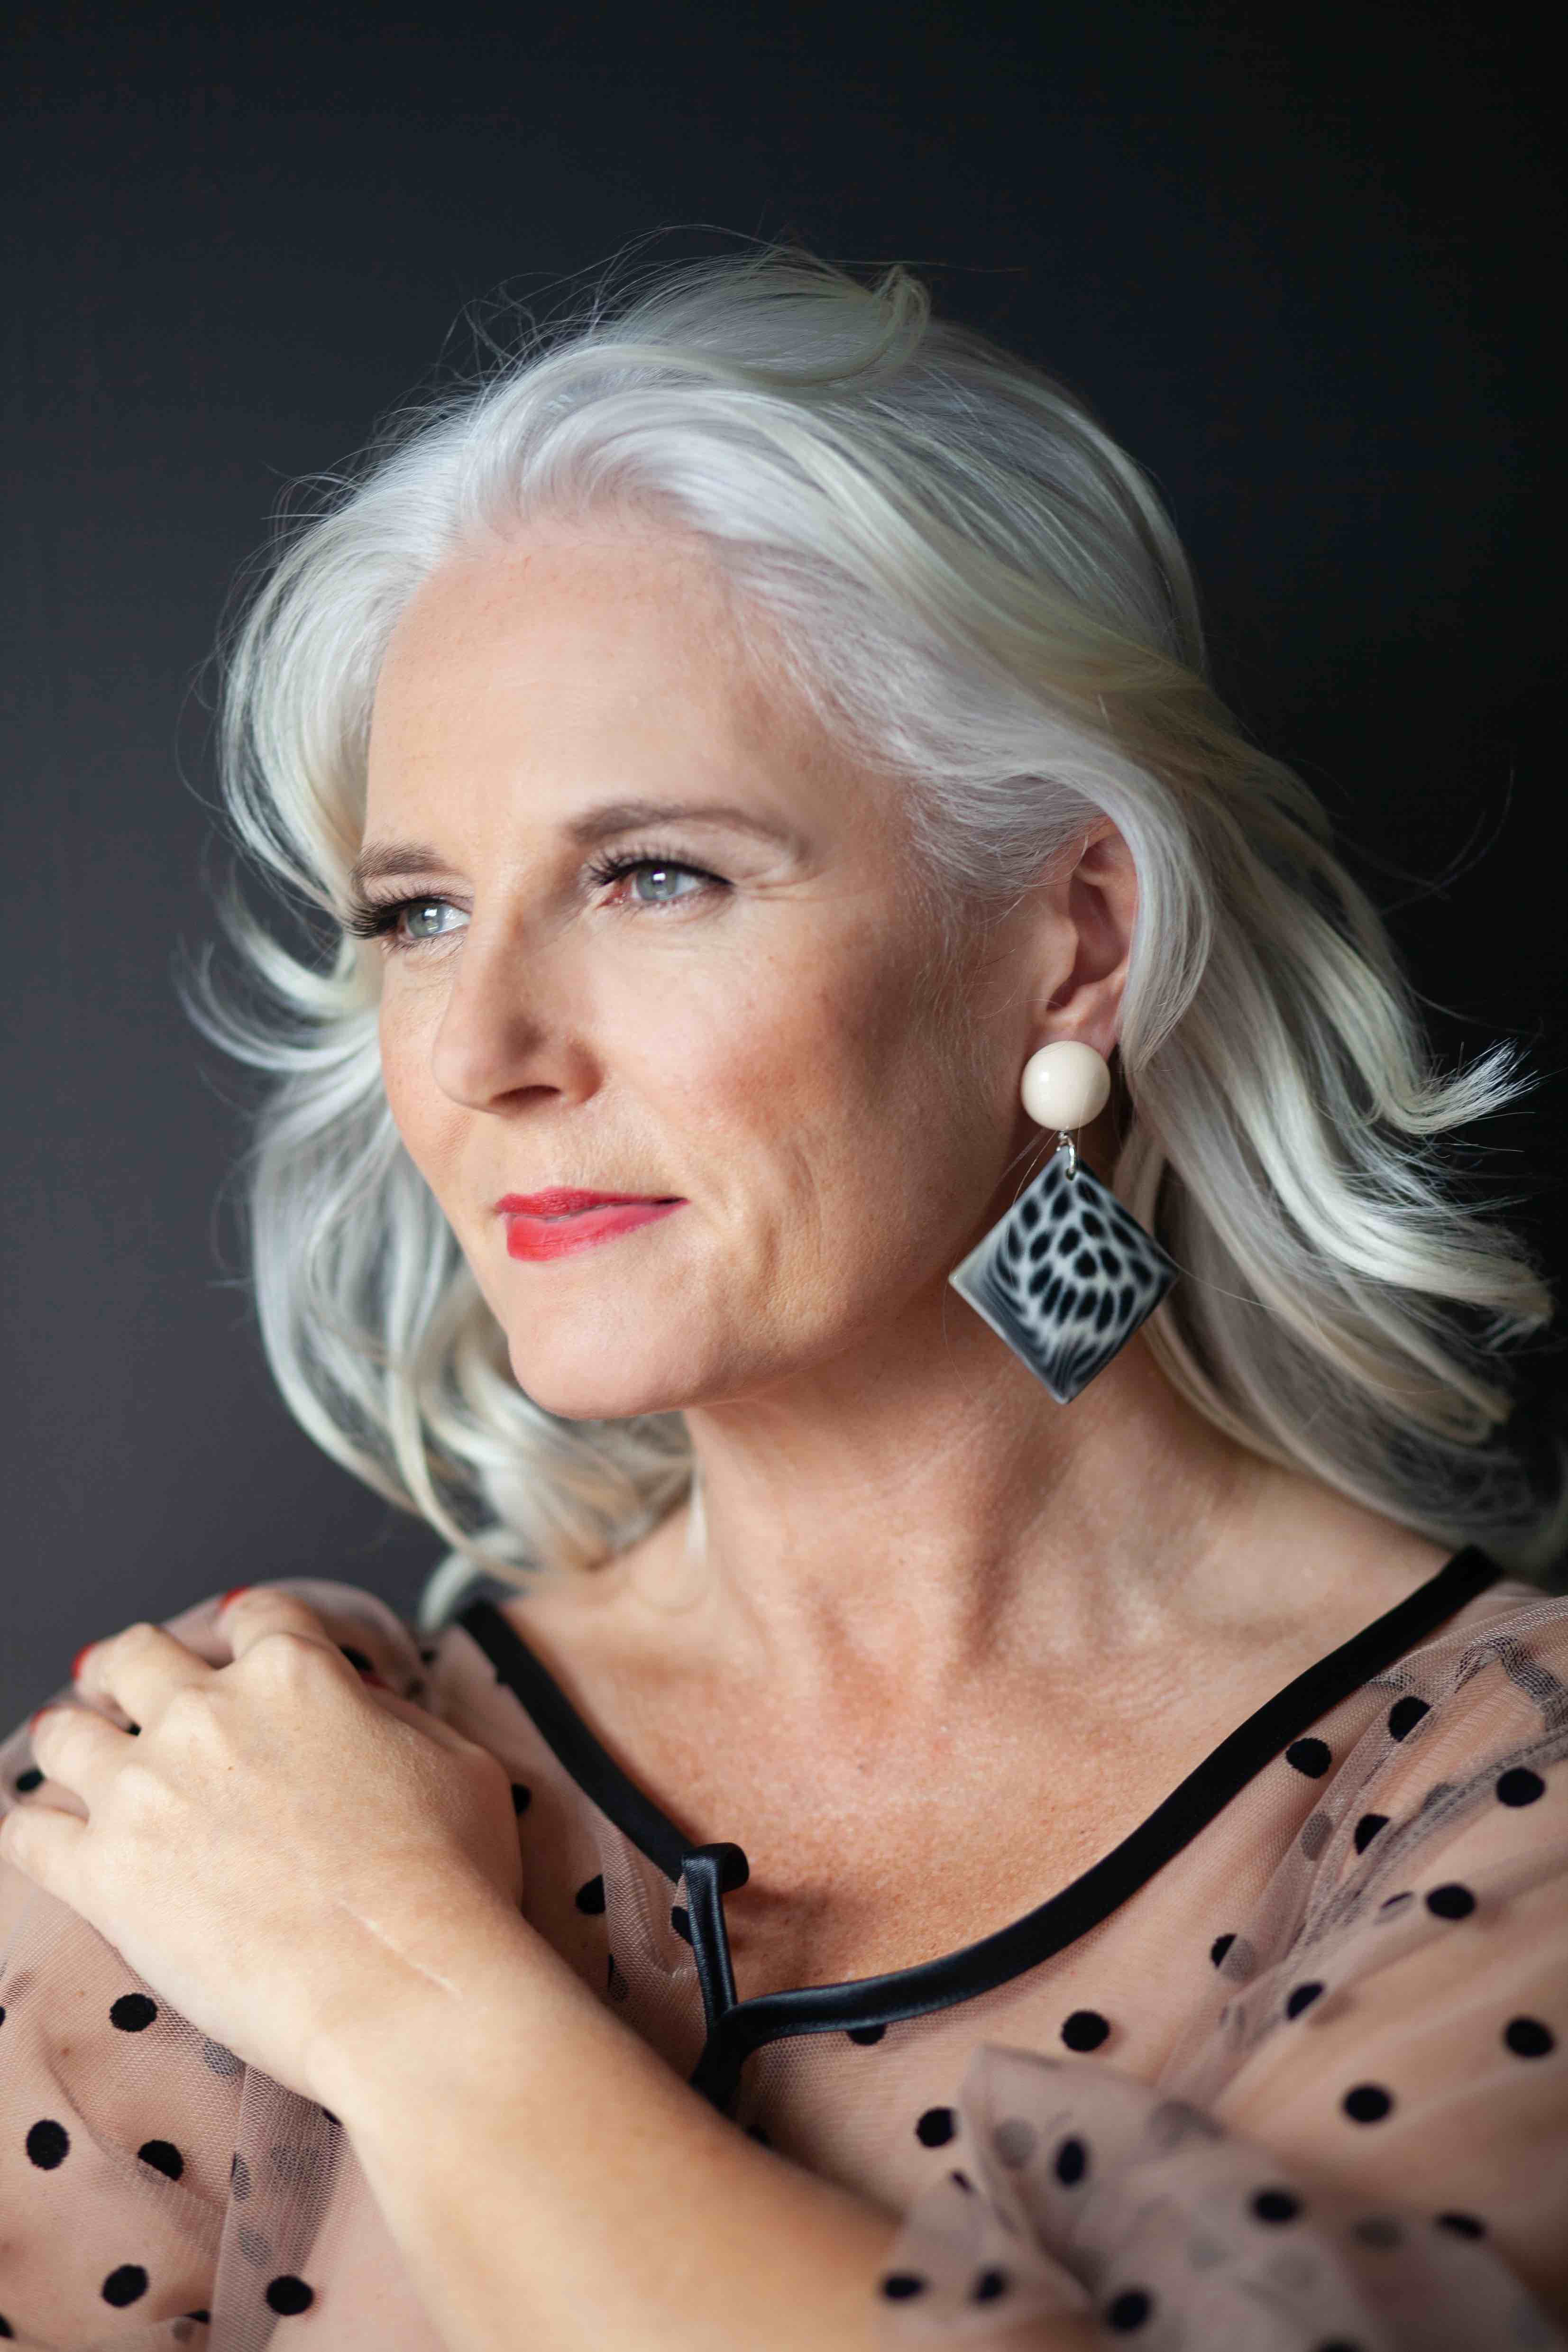 Pictures of Rachel Peru, a woman with silver hair